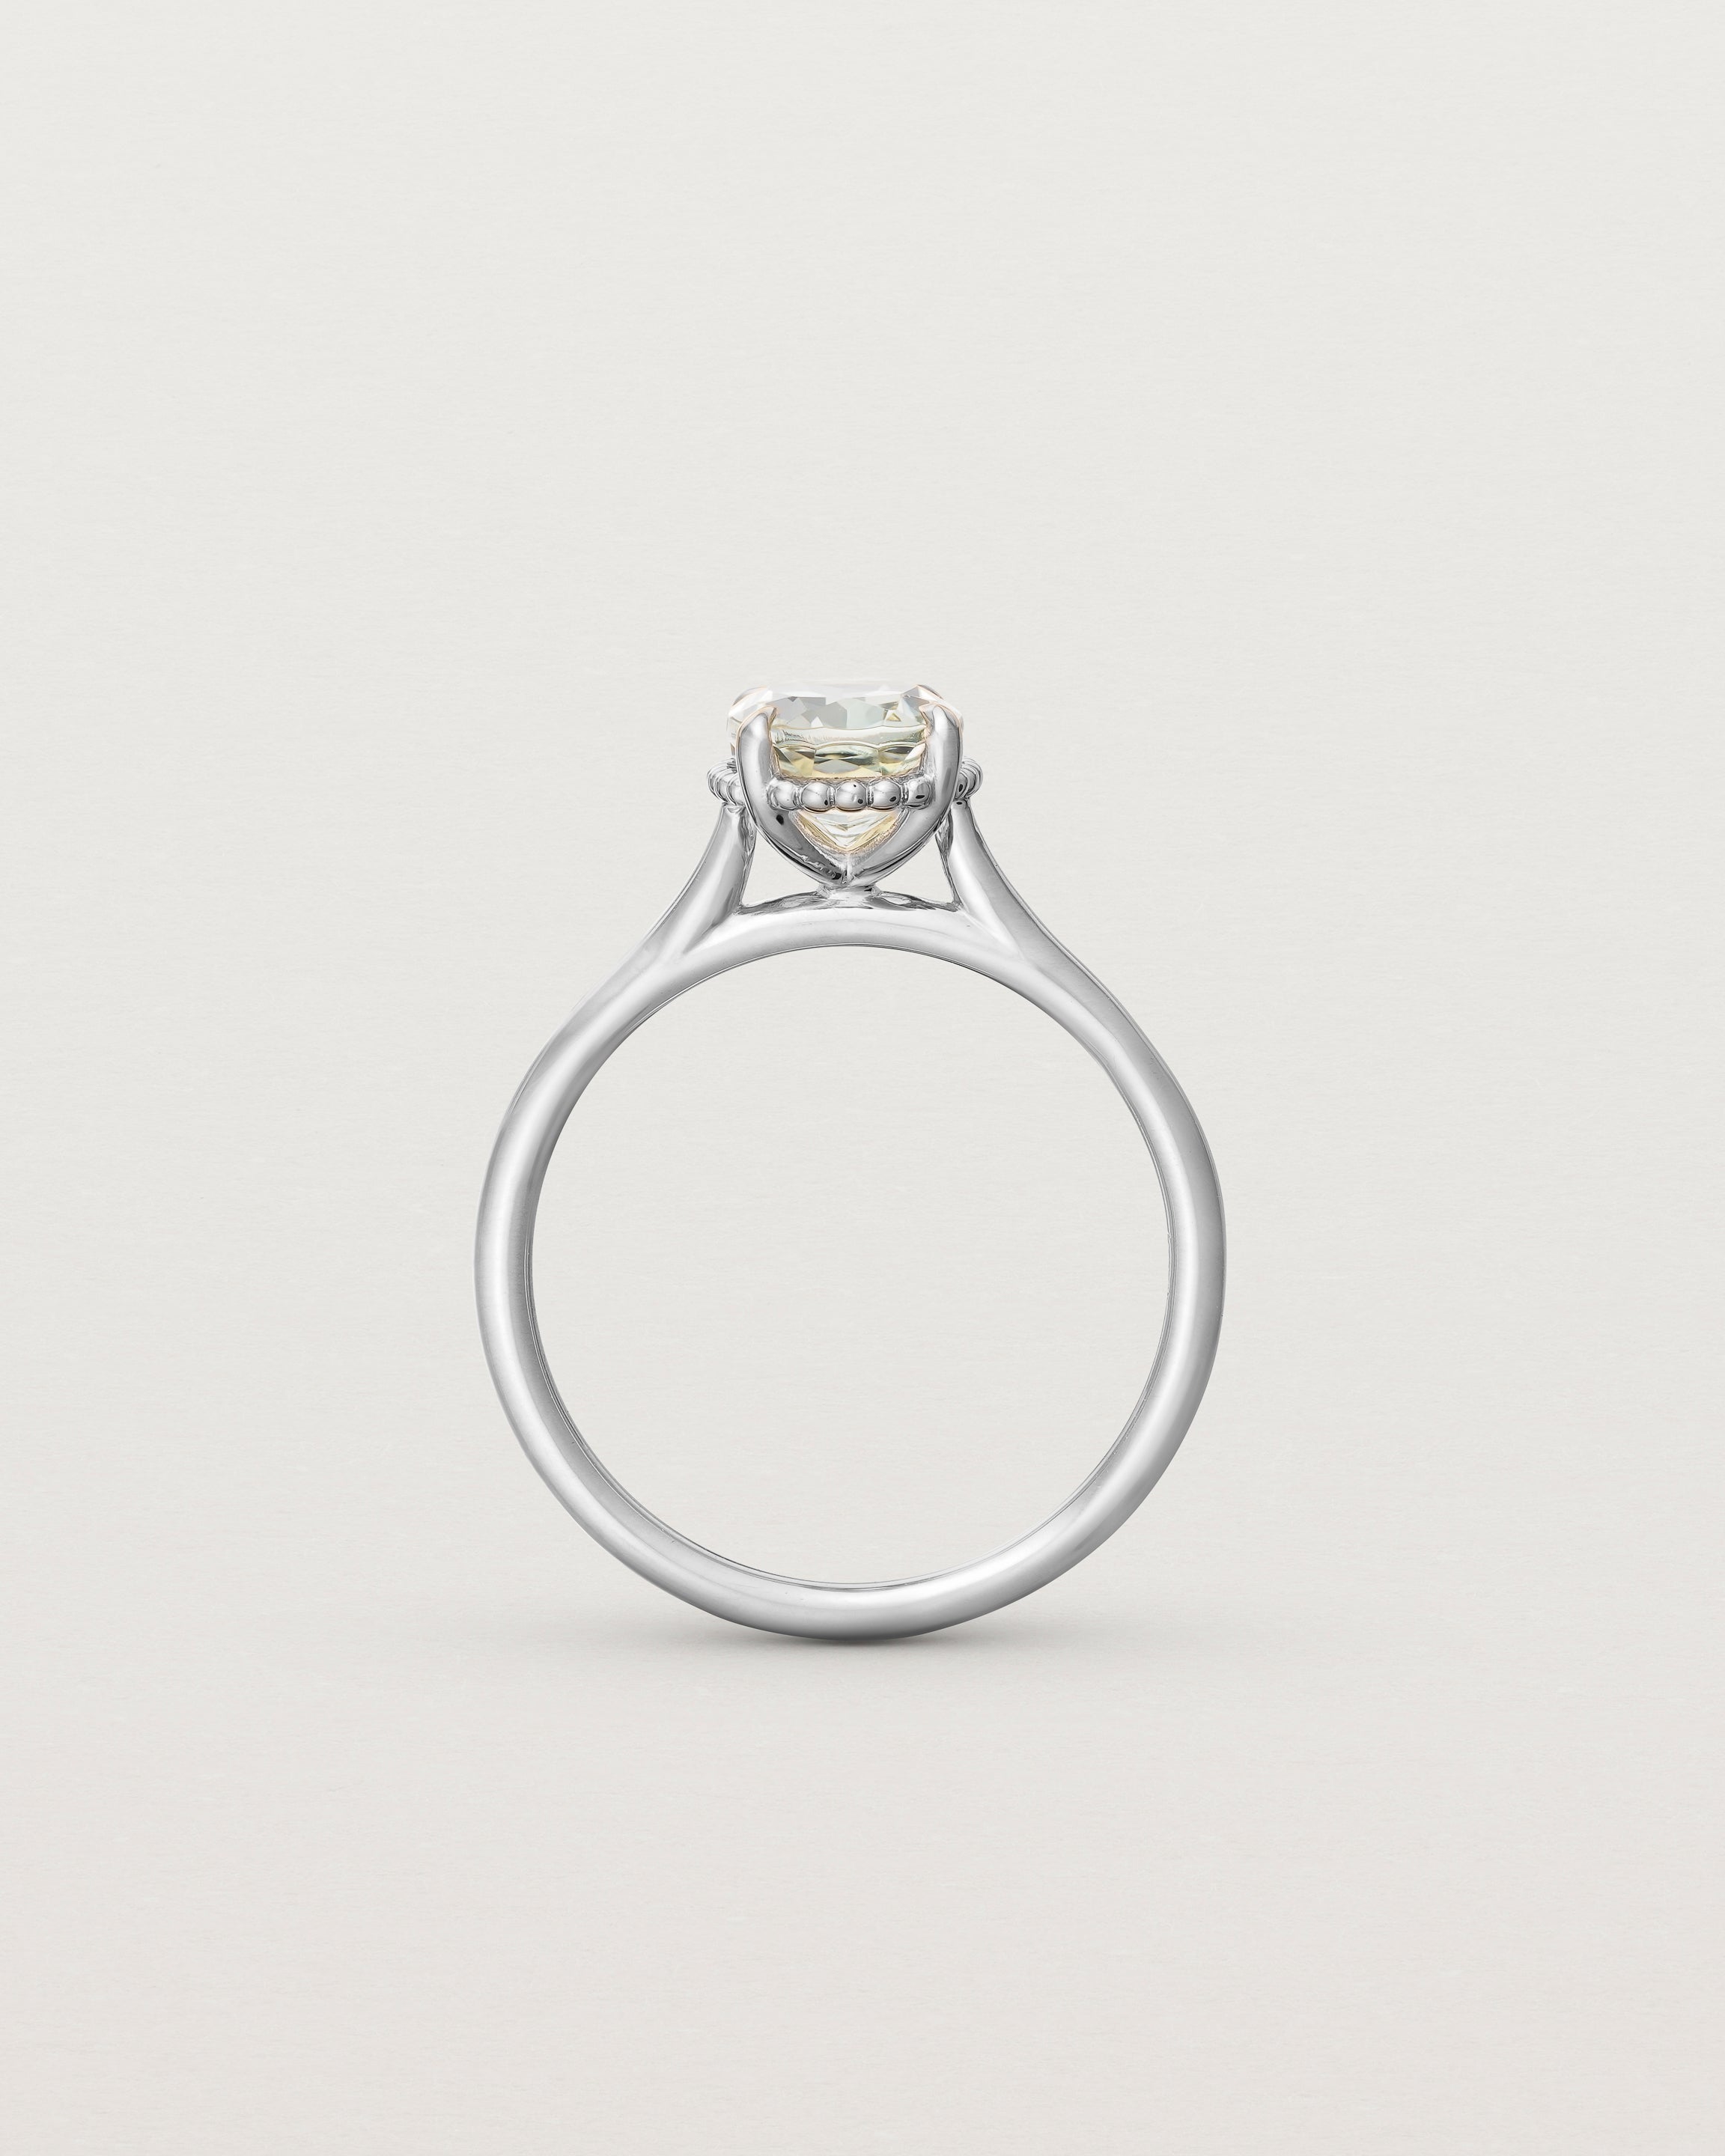 Standing view of the Thea Oval Solitaire | Green Amethyst in white gold.